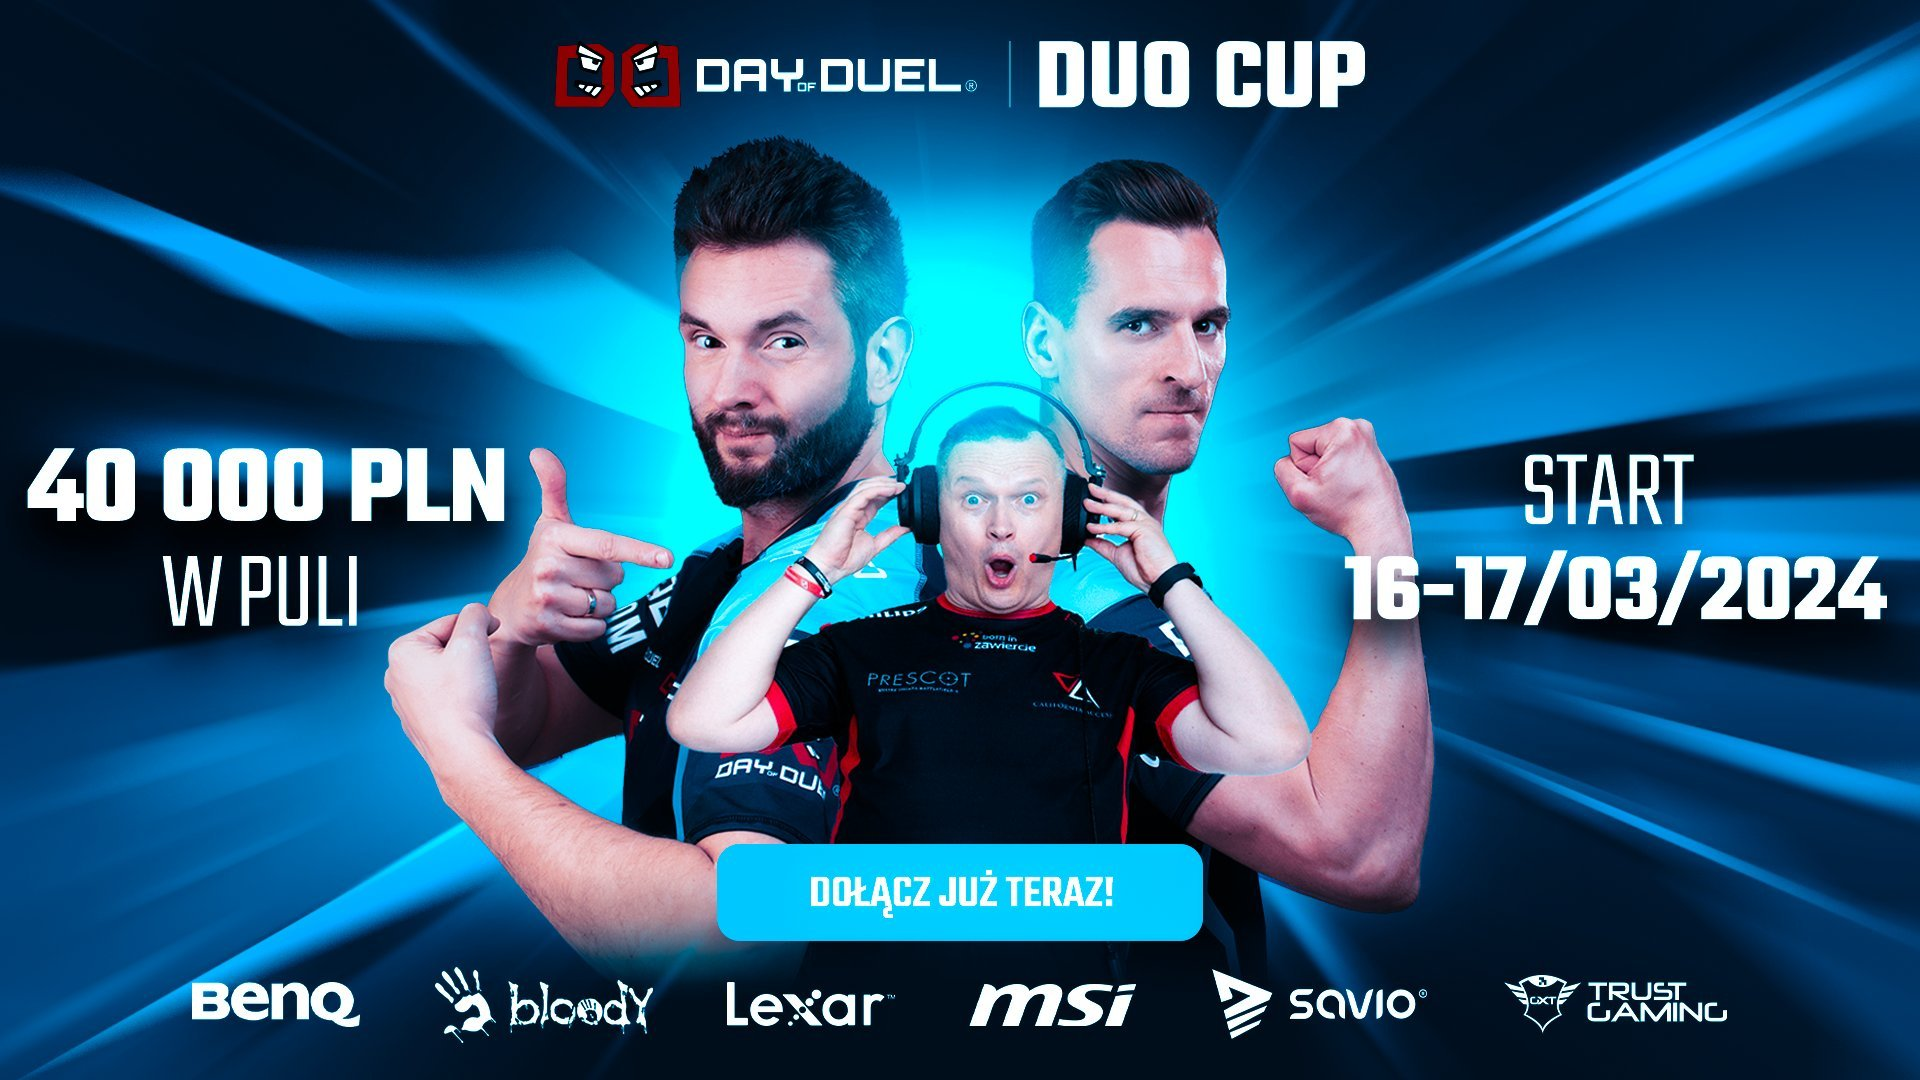 Day of Duel Duo Cup